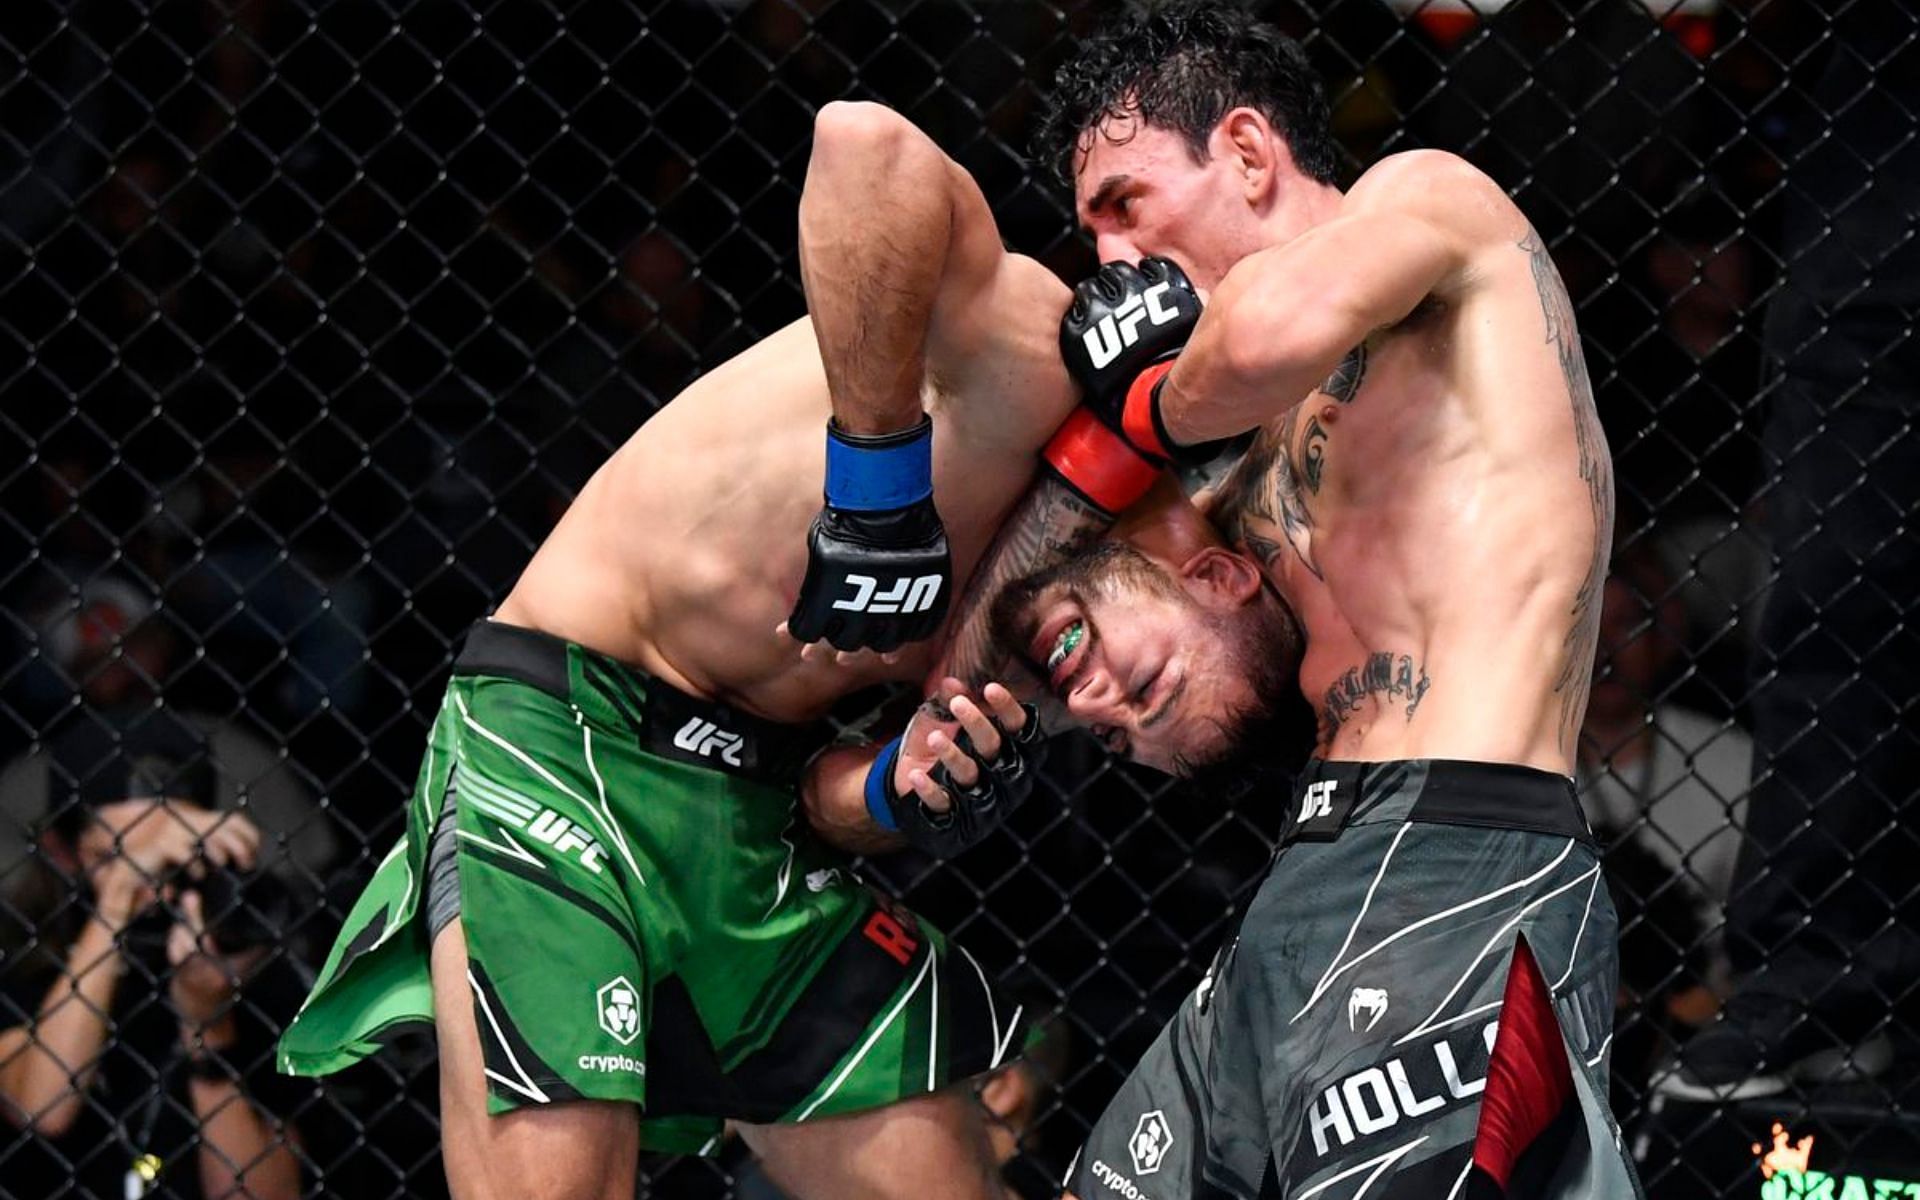 Max Holloway and Yair Rodriguez both looked like big winners after producing one of the best fights of 2021